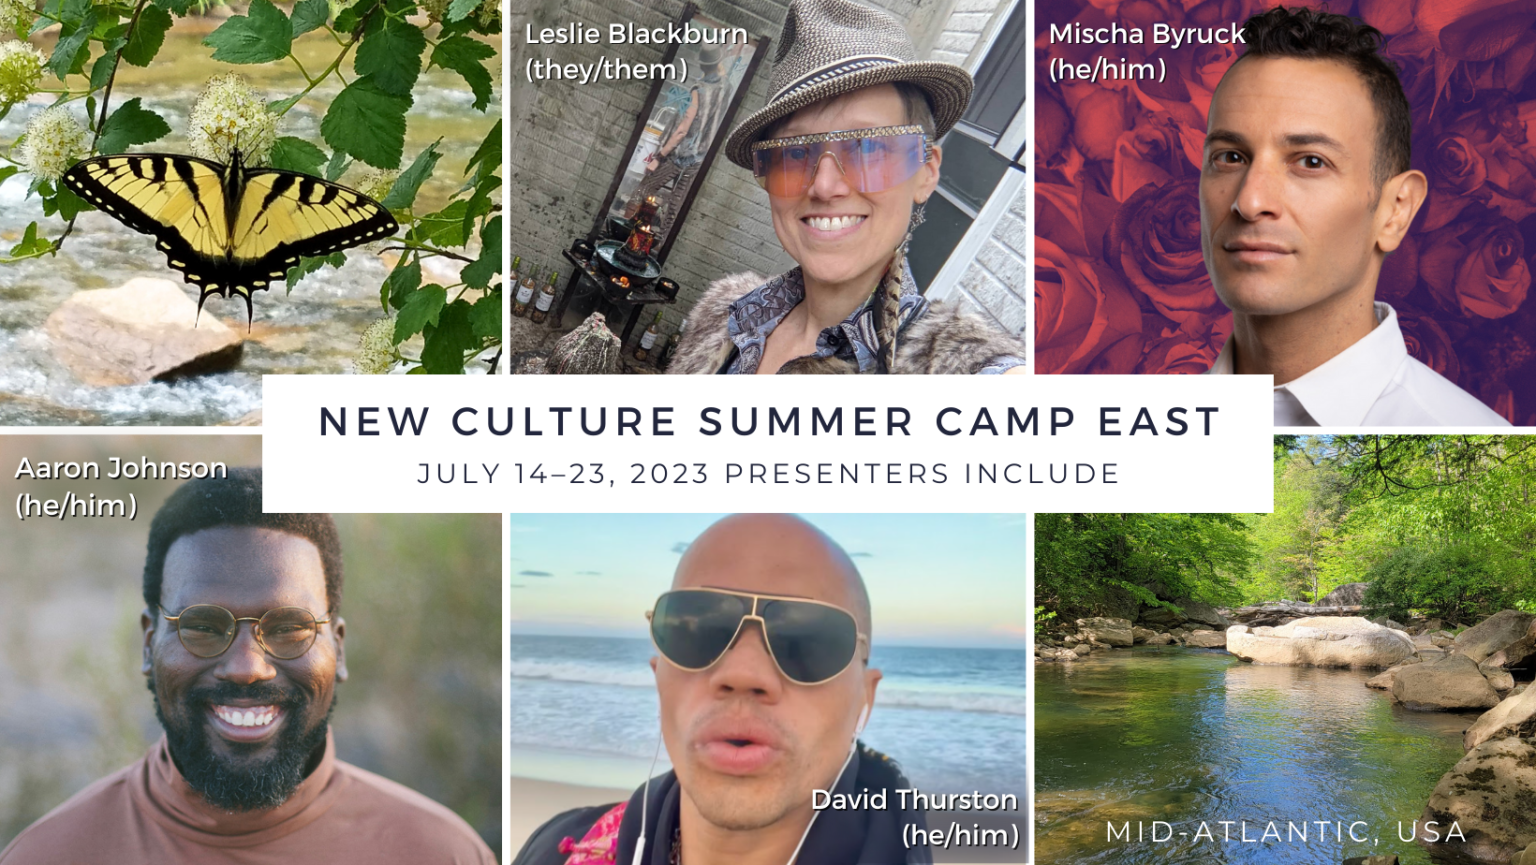 Banner for New Culture Summer Camp East 2023 with square photos of a butterfly on a leaf, lush greenery around the creek, plus Presenters: Leslie Blackburn (they/them) is smiling with a hat on and pink tinted sunglasses in front of a fire altar; Mischa Byruck is looking confident in front of a background of red roses; Aaron Johnson (he/him) is smiling outside on a sunny day; David Thurston (he/him) is wearing dark sunglasses with lips slightly open, in front of the ocean, sand, and a blue sky.